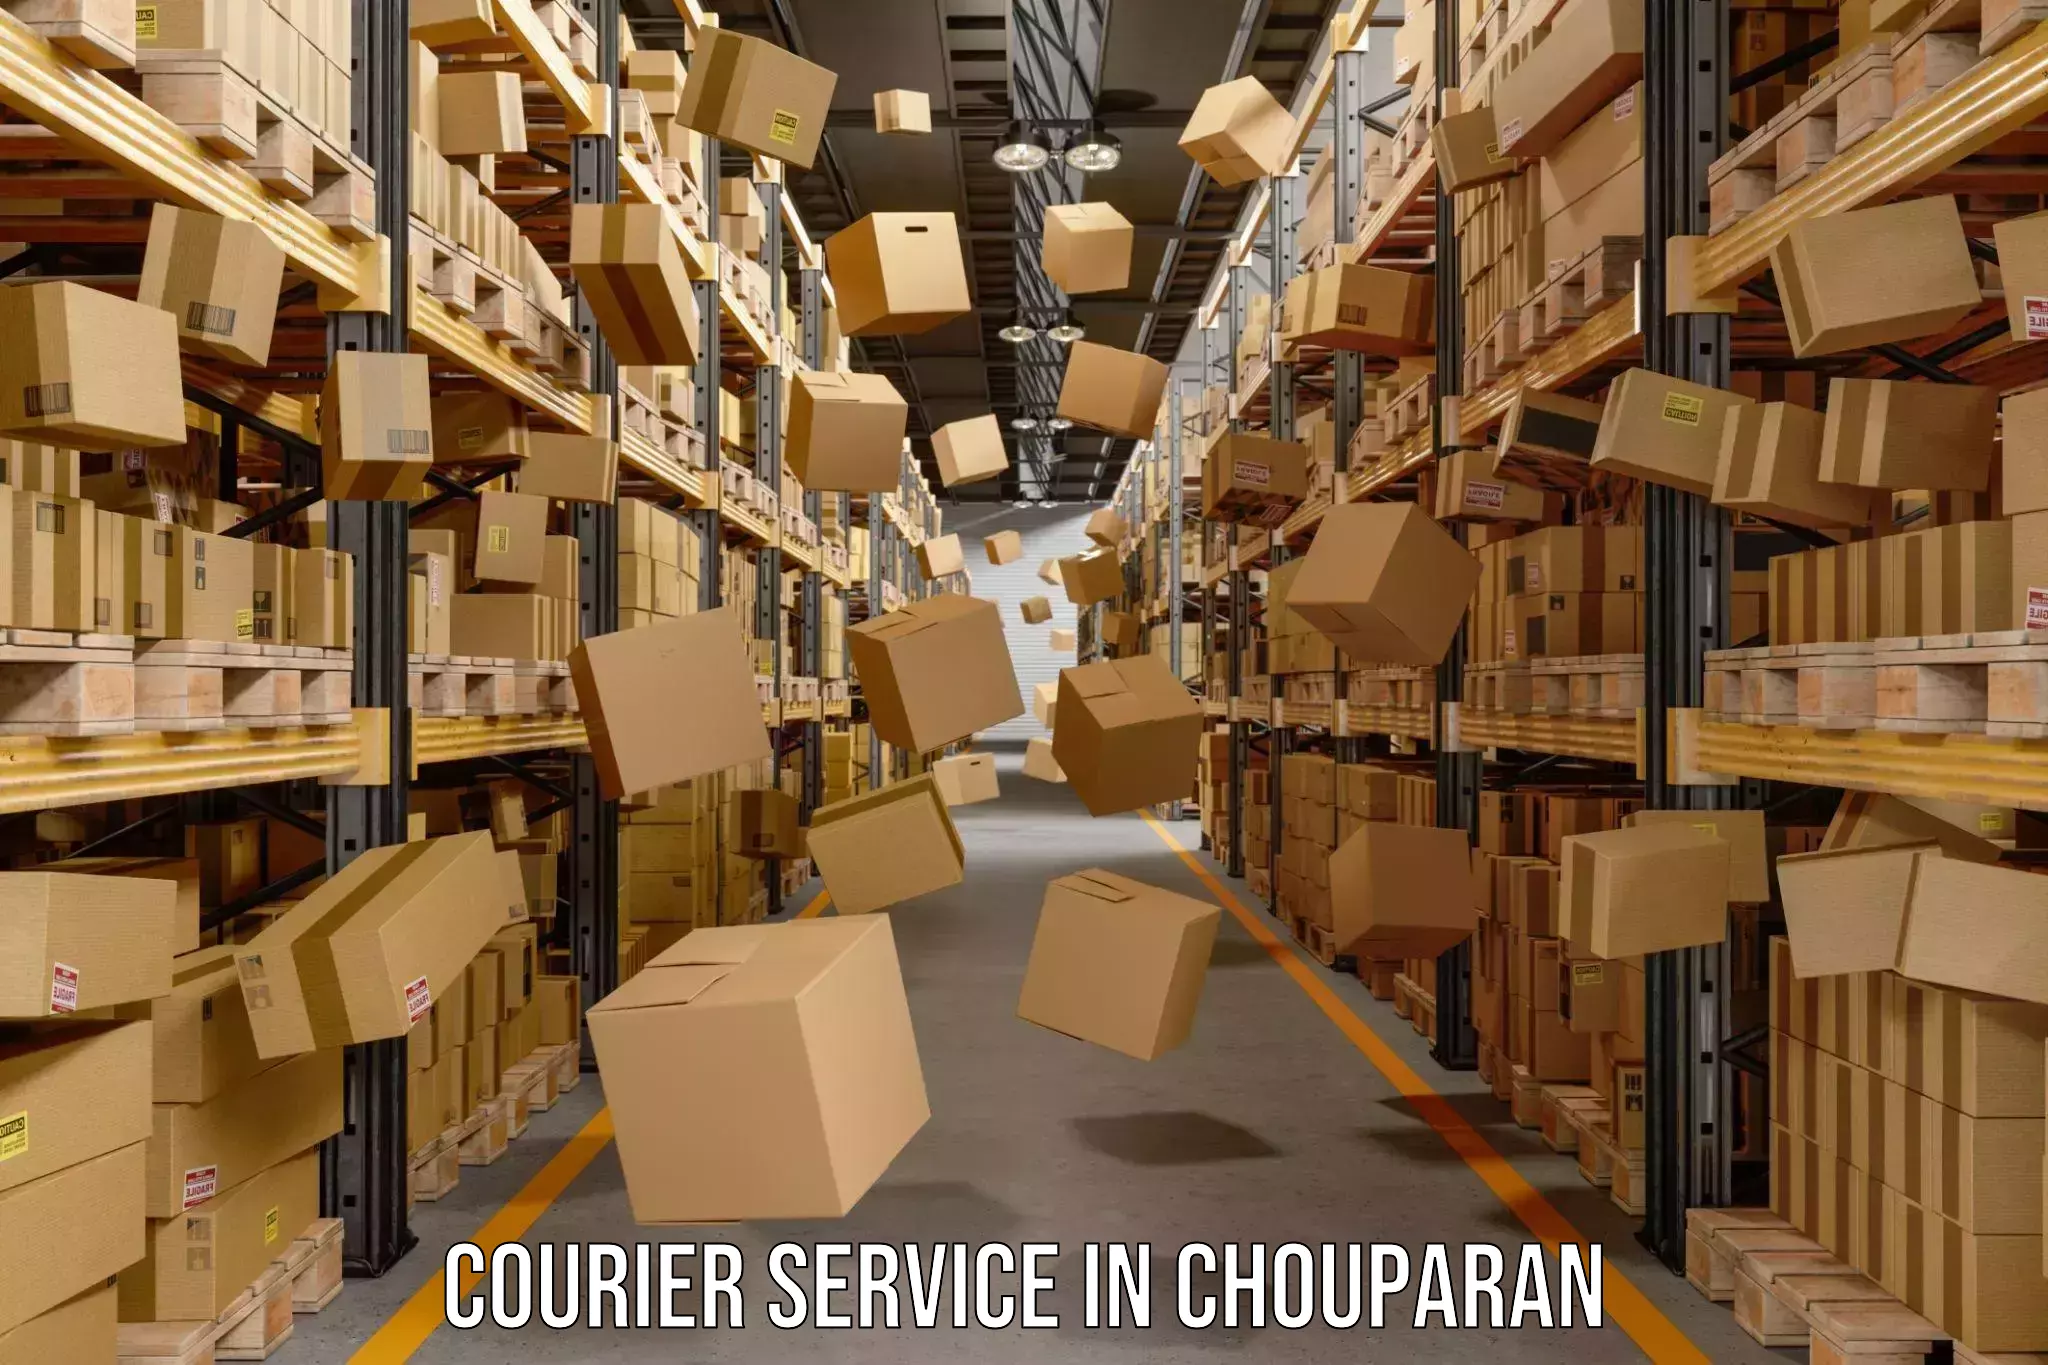 Efficient order fulfillment in Chouparan